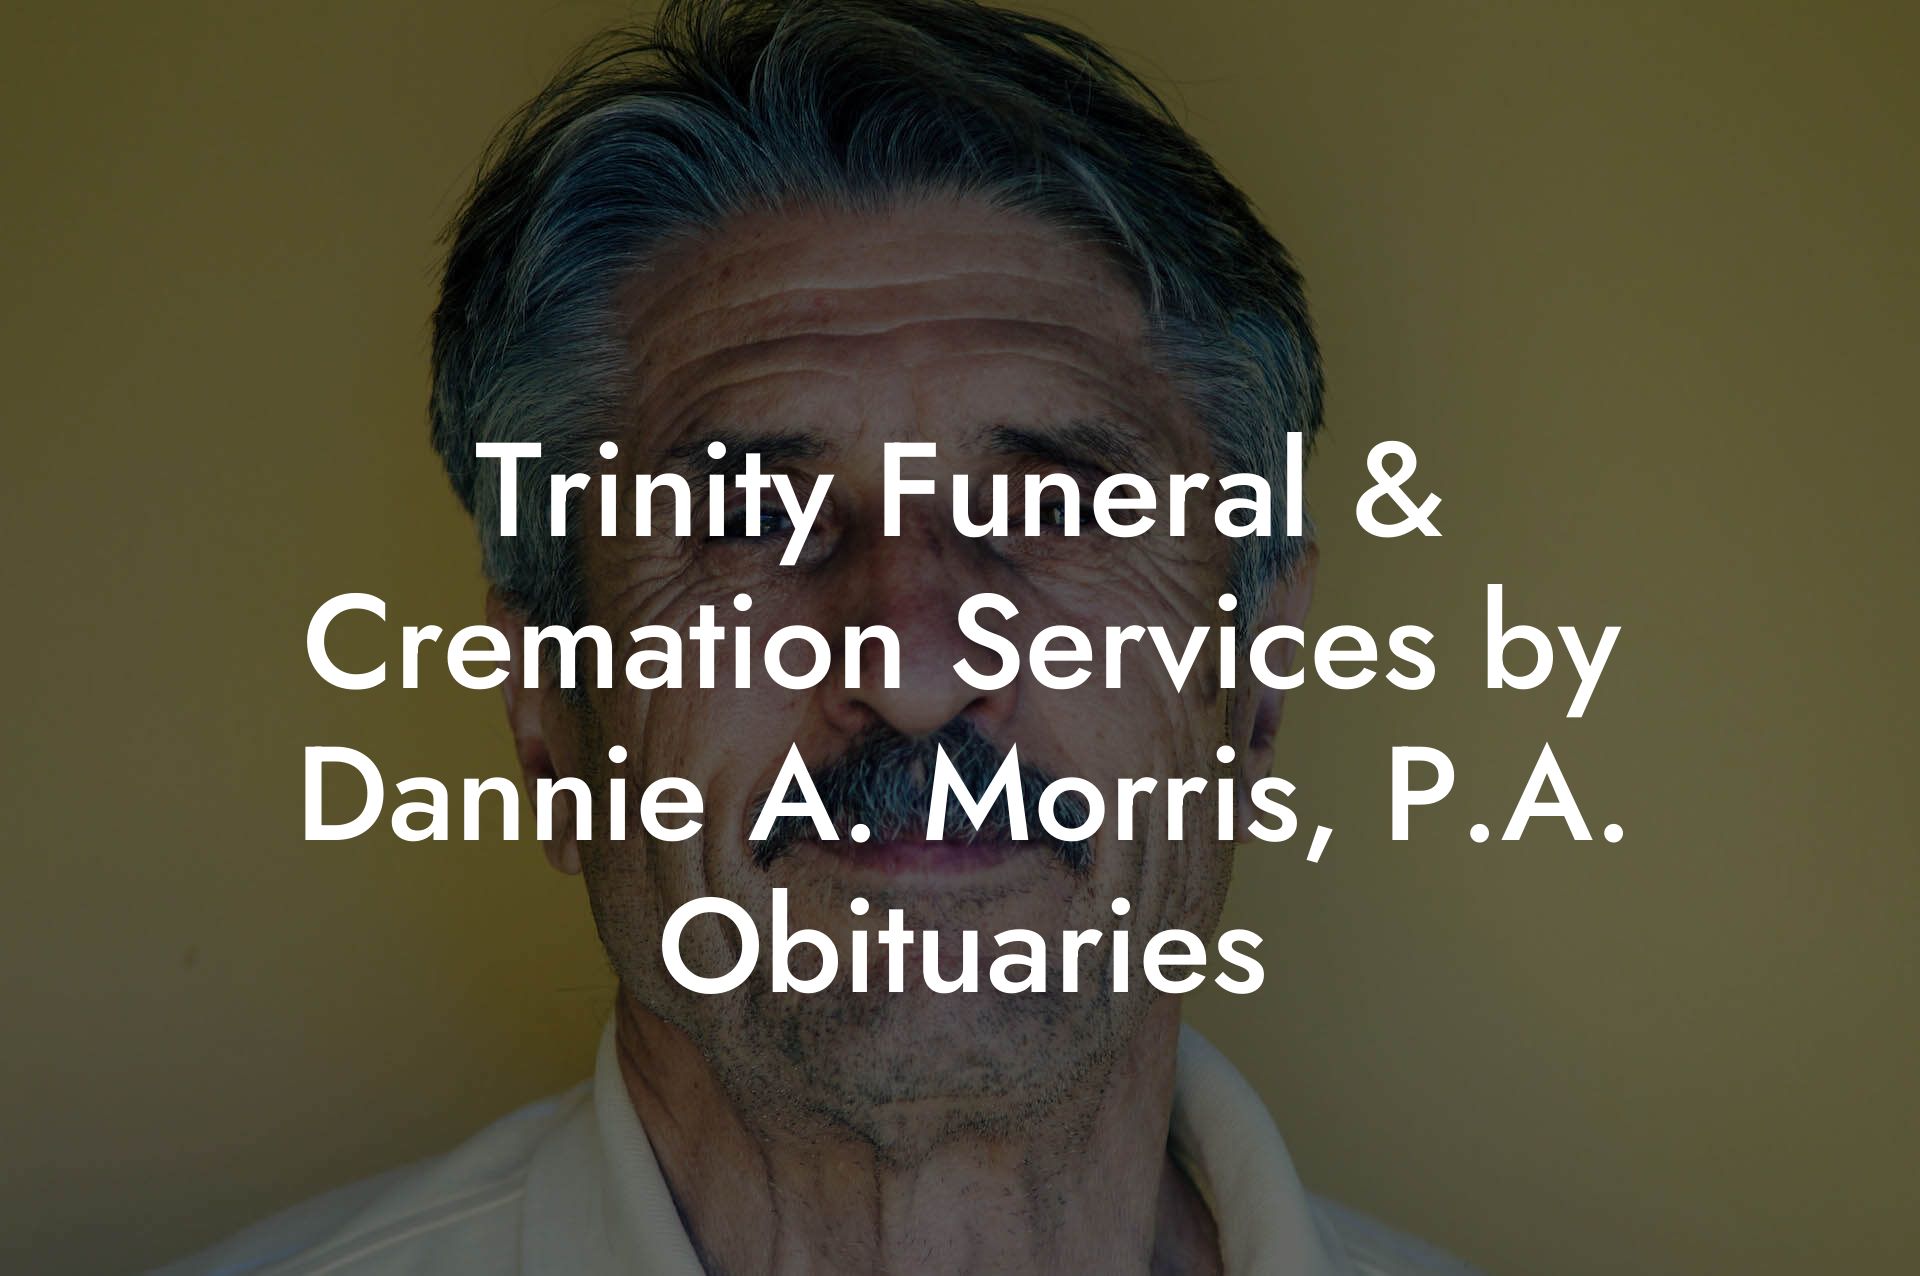 Trinity Funeral & Cremation Services by Dannie A. Morris, P.A. Obituaries